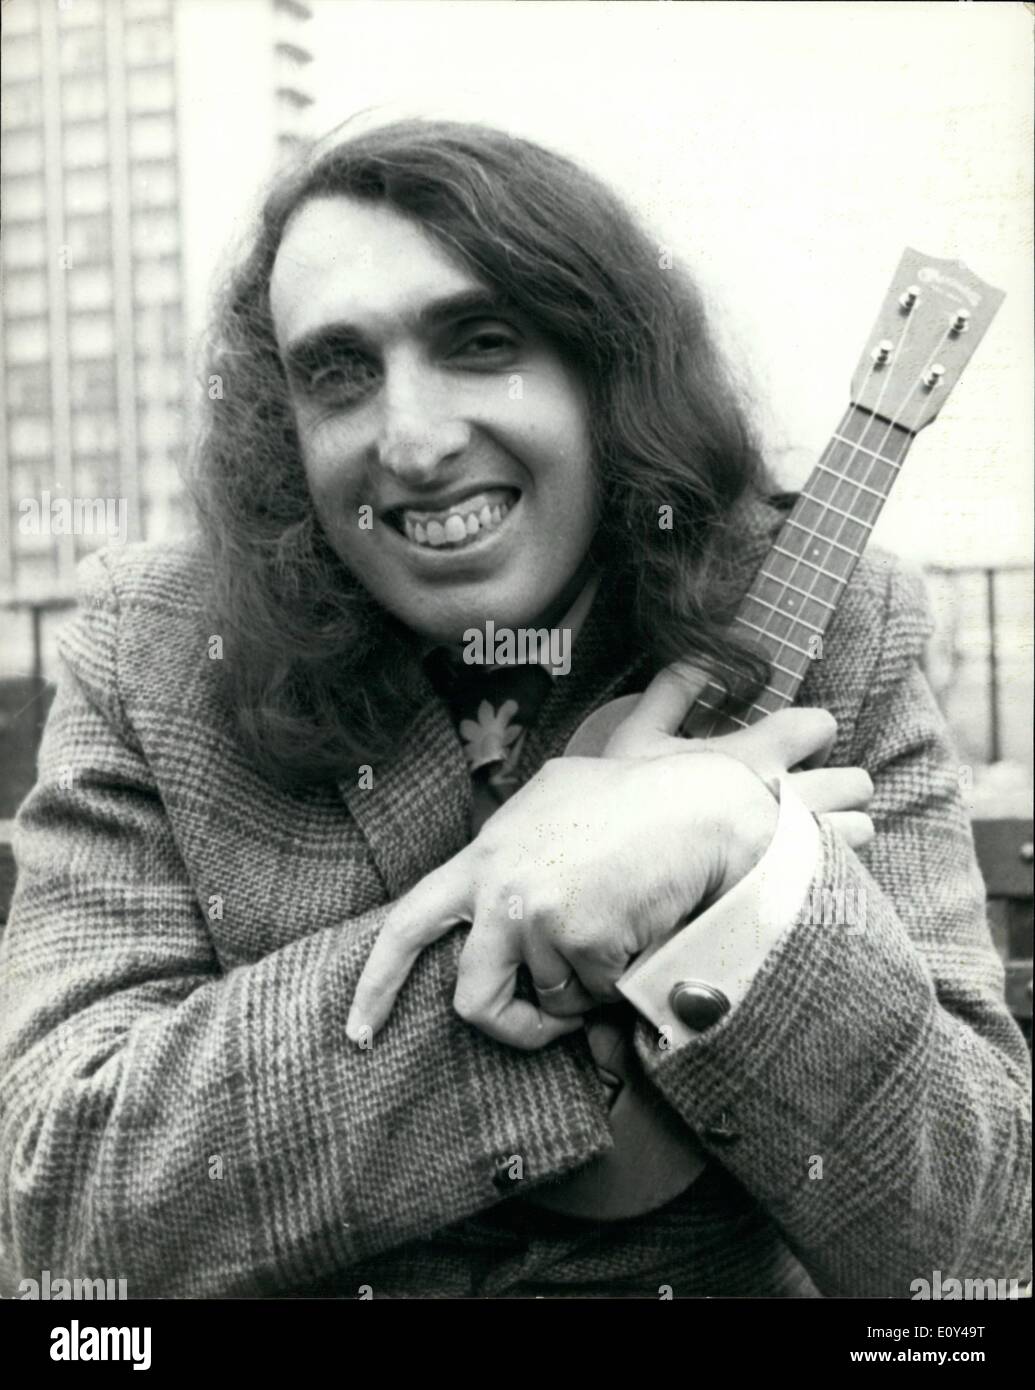 Oct. 10, 1968 - Tiny Tim Of The Pop World Arrived in Britain: Tiny Tim, whose recording on Reprise issued here by Pye Records-include the best selling L.P. ''God bless Tiny Tim' and numerous singles, including the celebrated ''Tip Toe Thru' the Tulips'' arrived in London today. His engagement included radio and T.V . shows, and a concert at the Royal Albert Hall next Wednesday.Photo shows Tiny Tim seen at the Playboy club in Park Lane this morning. Stock Photo